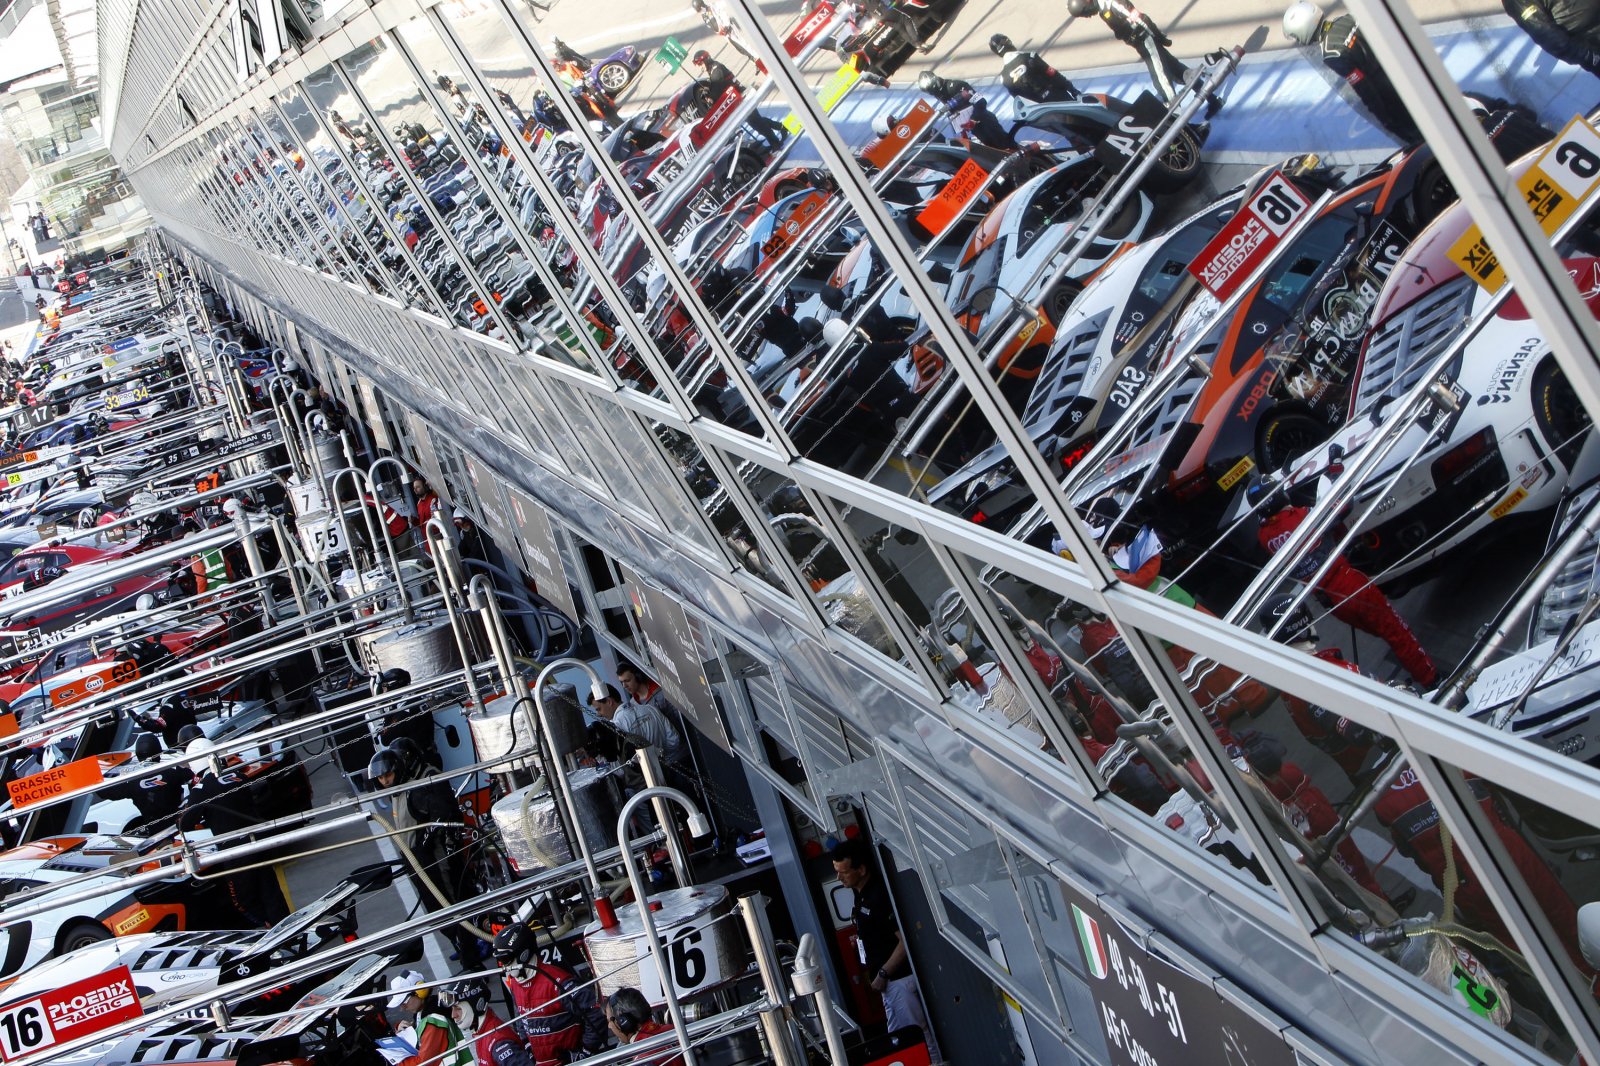 Monza’s temple of speed hosts opening round of Blancpain Endurance Series 2014